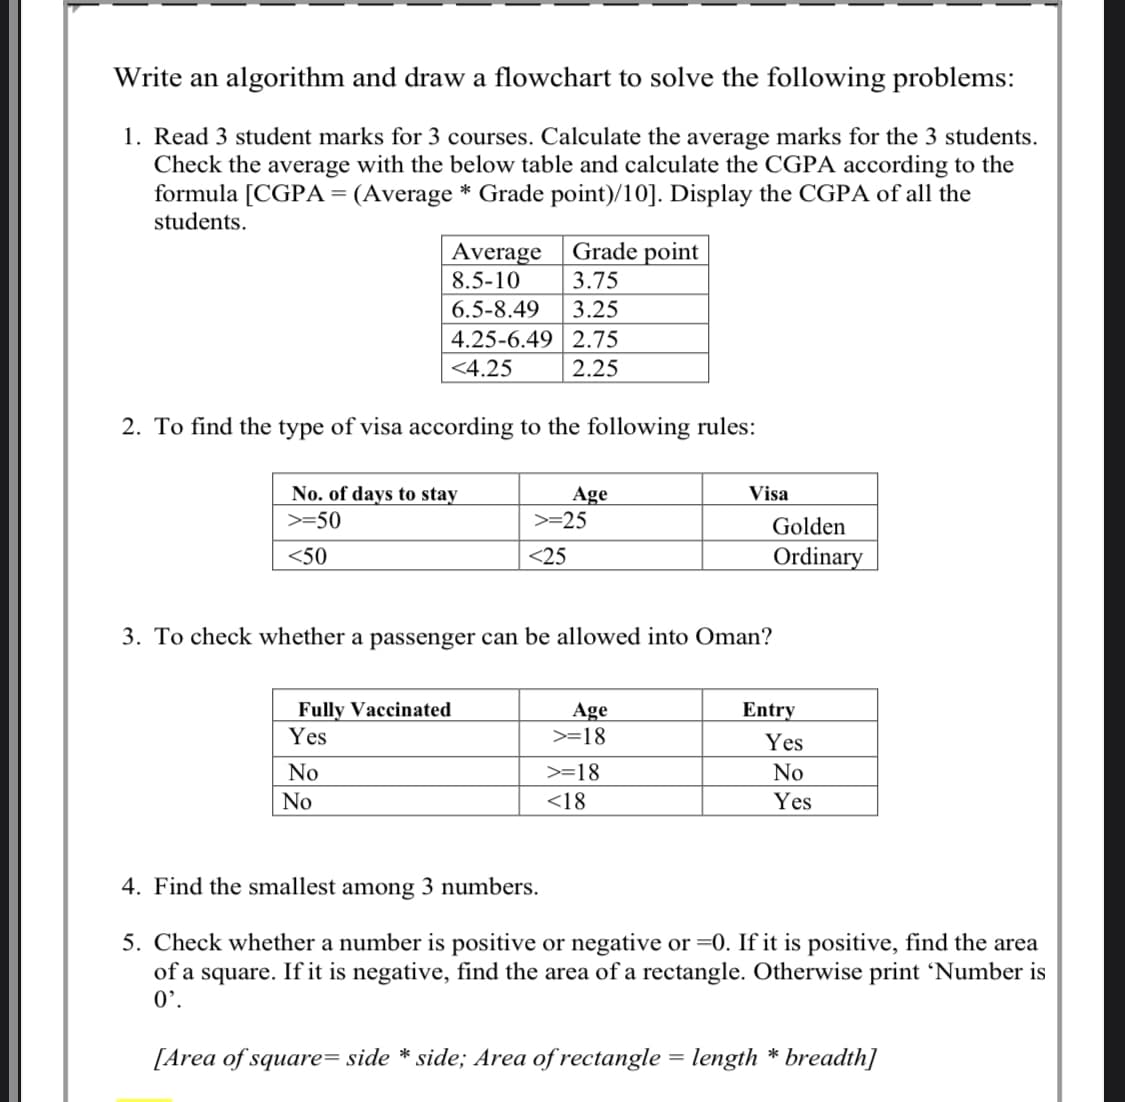 Write an algorithm and draw a flowchart to solve the following problems:
1. Read 3 student marks for 3 courses. Calculate the average marks for the 3 students.
Check the average with the below table and calculate the CGPA according to the
formula [CGPA=(Average * Grade point)/10]. Display the CGPA of all the
students.
Grade point
Average
8.5-10
3.75
6.5-8.49
3.25
4.25-6.49 2.75
<4.25
2.25
2. To find the type of visa according to the following rules:
No. of days to stay
Age
>=25
Visa
>=50
Golden
<50
<25
Ordinary
3. To check whether a passenger can be allowed into Oman?
Fully Vaccinated
Yes
Age
>=18
Entry
Yes
No
>=18
No
No
<18
Yes
4. Find the smallest among 3 numbers.
5. Check whether a number is positive or negative or =0. If it is positive, find the area
of a square. If it is negative, find the area of a rectangle. Otherwise print 'Number is
0'.
[Area of square= side * side; Area of rectangle = length * breadth]
